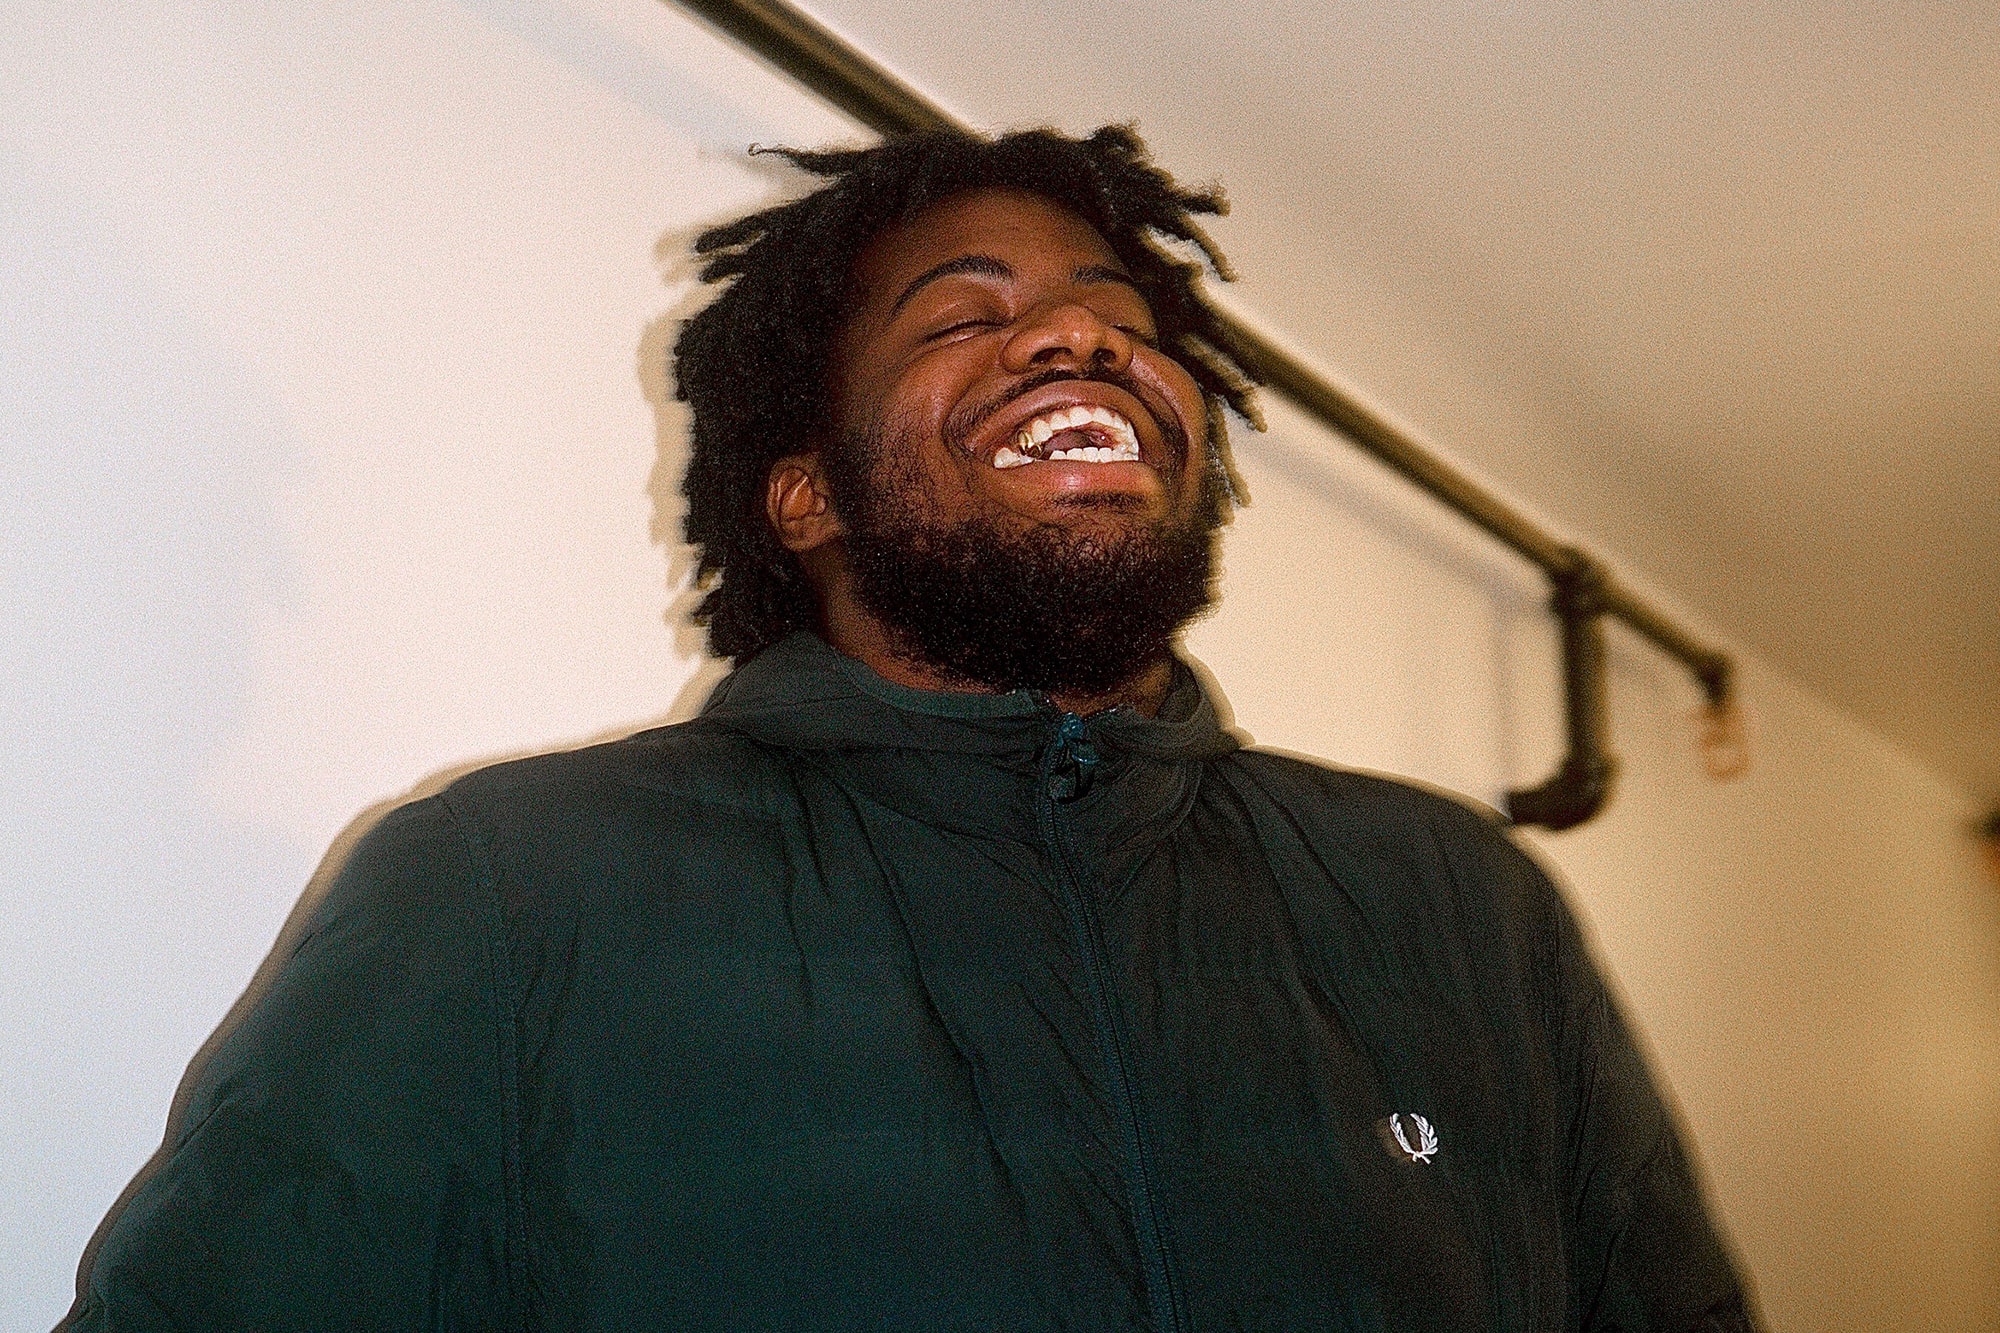 MIKE Weight of the World Album Interview with Sideshow NYC Brooklyn The Bronx New York City London Tears of Joy sLums Rapper Rap HYPEBEAST Best New Tracks Earl Sweatshirt Navy Blue Medhane